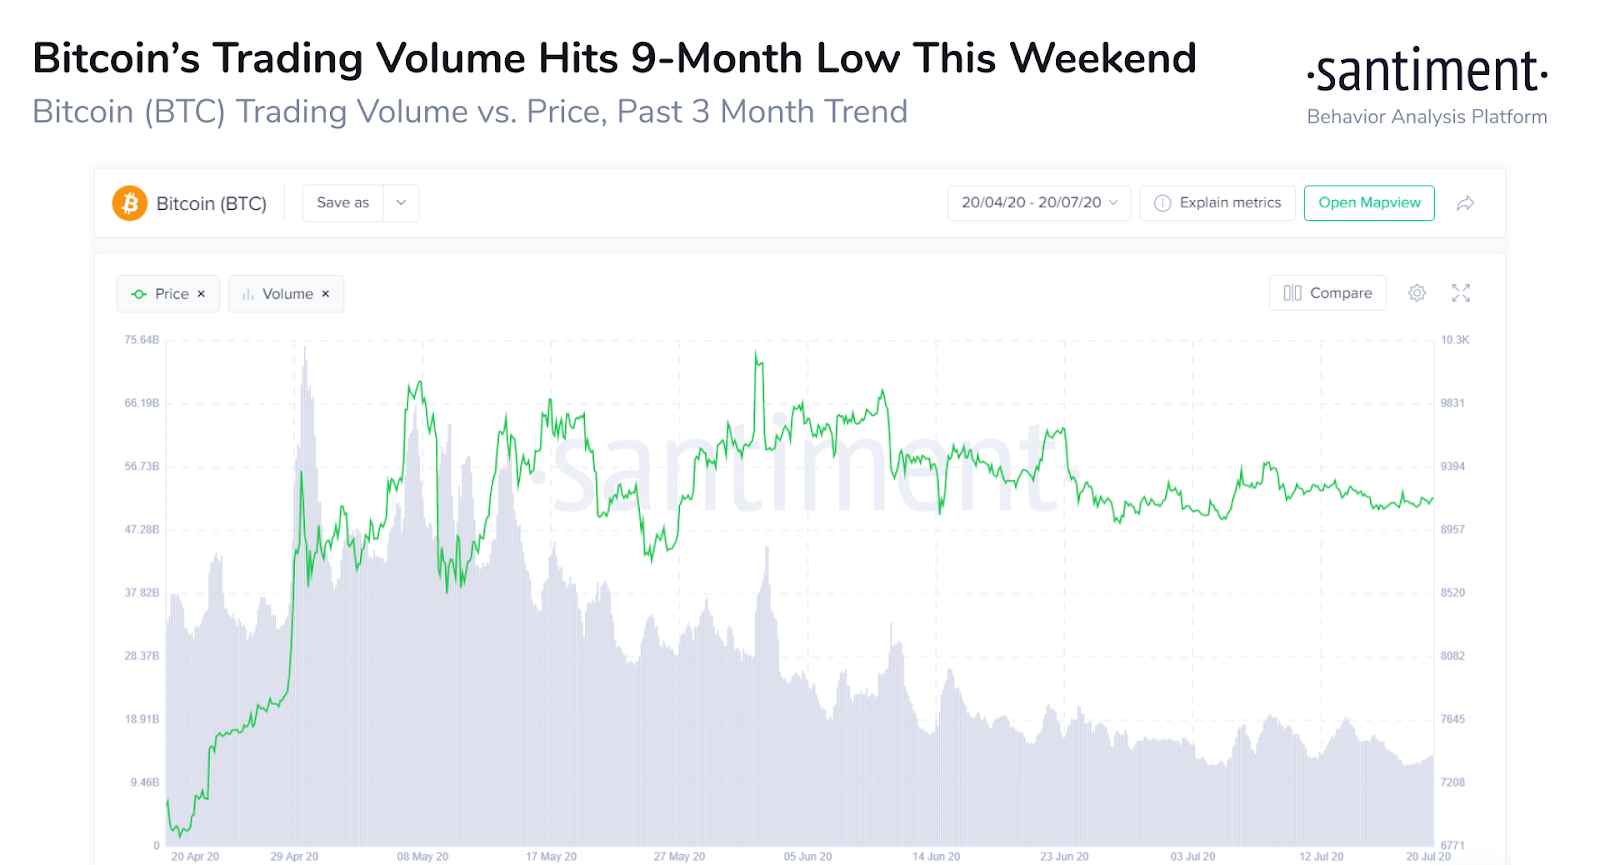 The trading volume of Bitcoin continues to decline